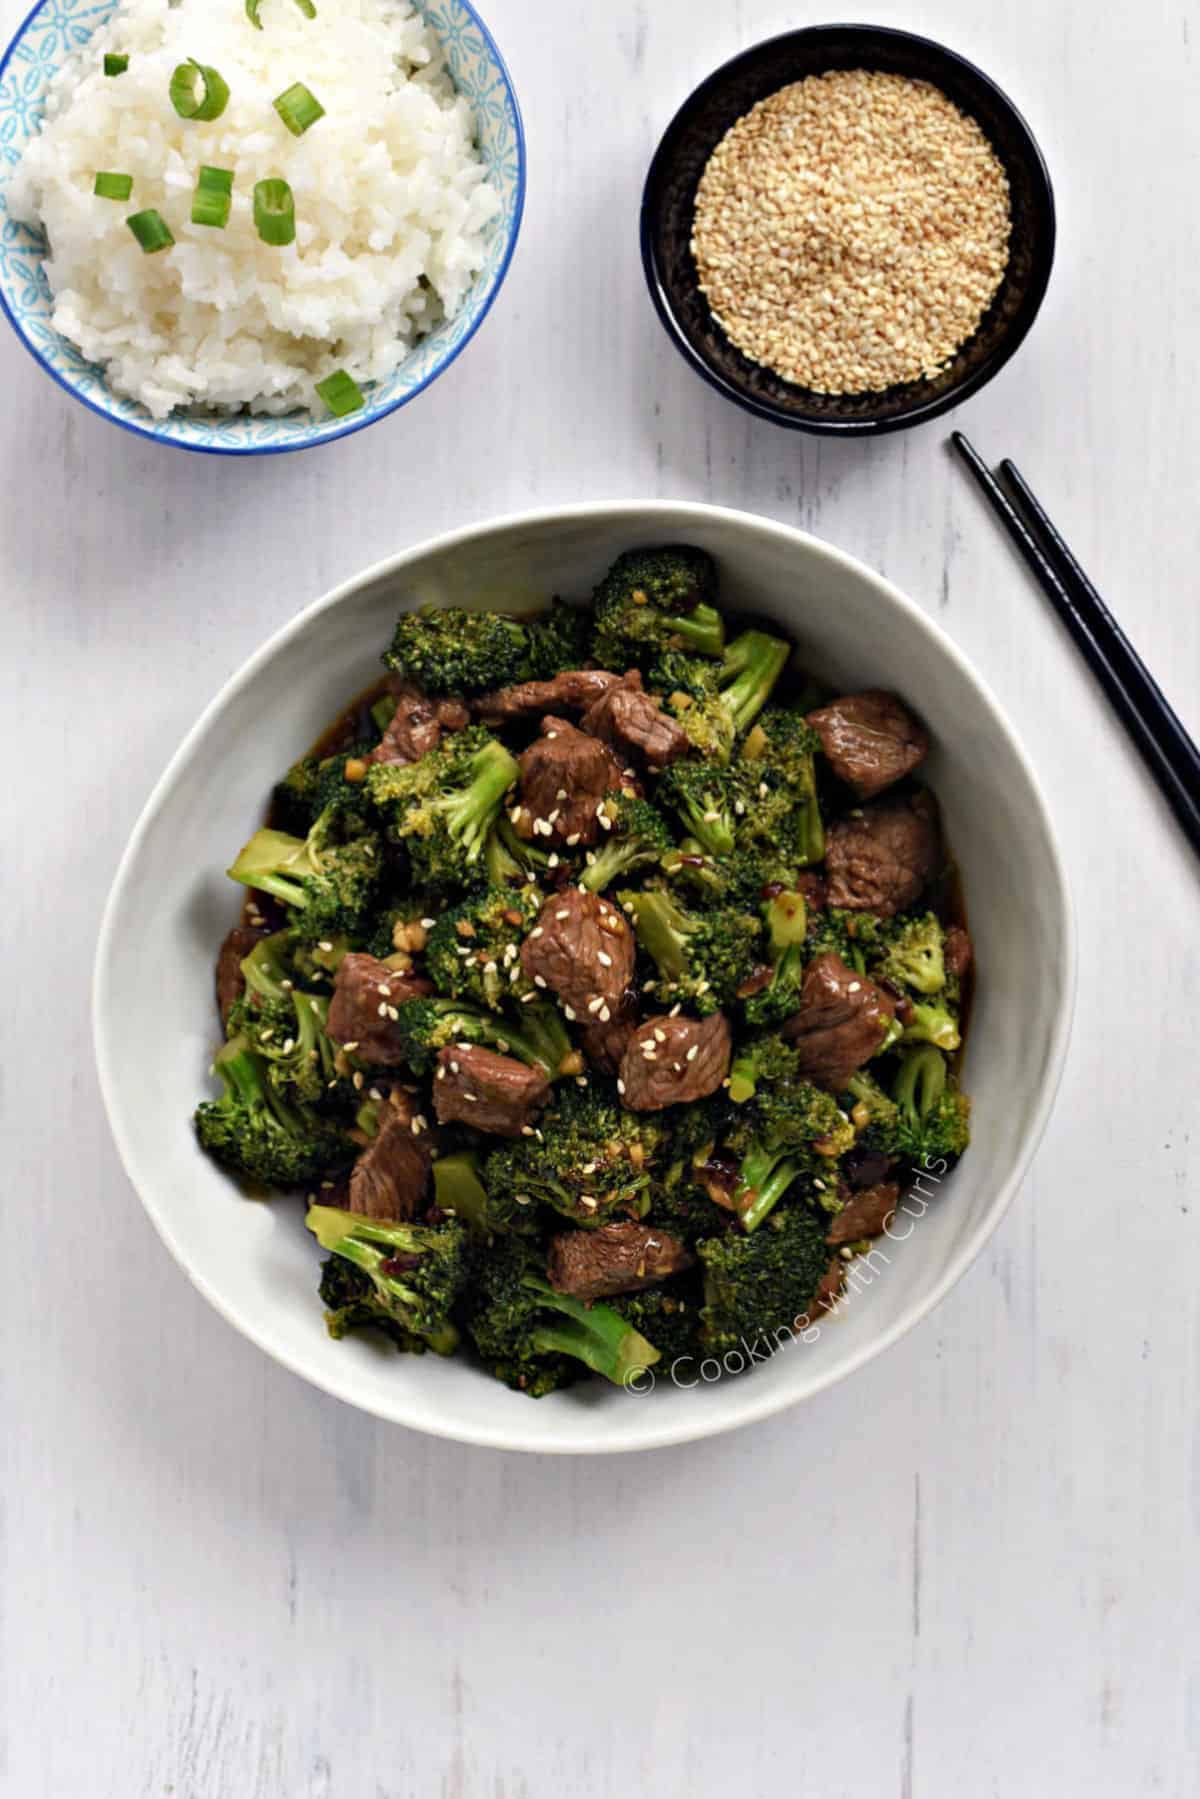 Strips of beef and broccoli florets coated in sauce and sprinkled with sesame seeds in a large bowl.